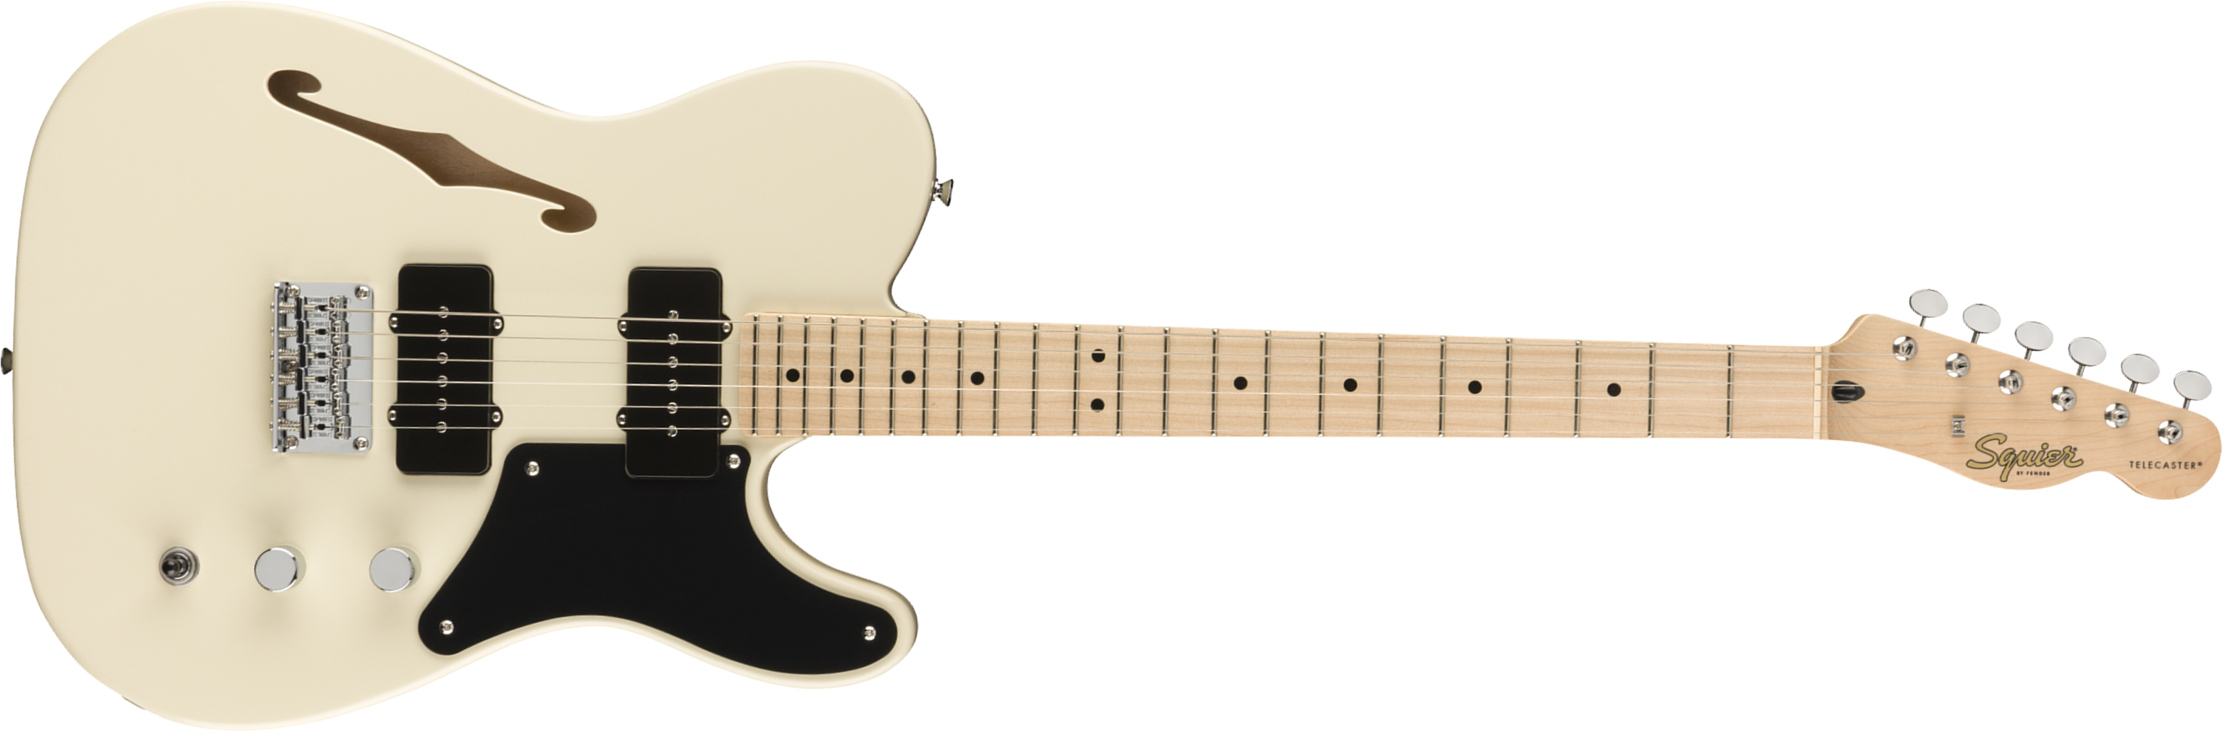 Squier Tele Thinline Cabronita Paranormal Ss Ht Mn - Olympic White - Tel shape electric guitar - Main picture